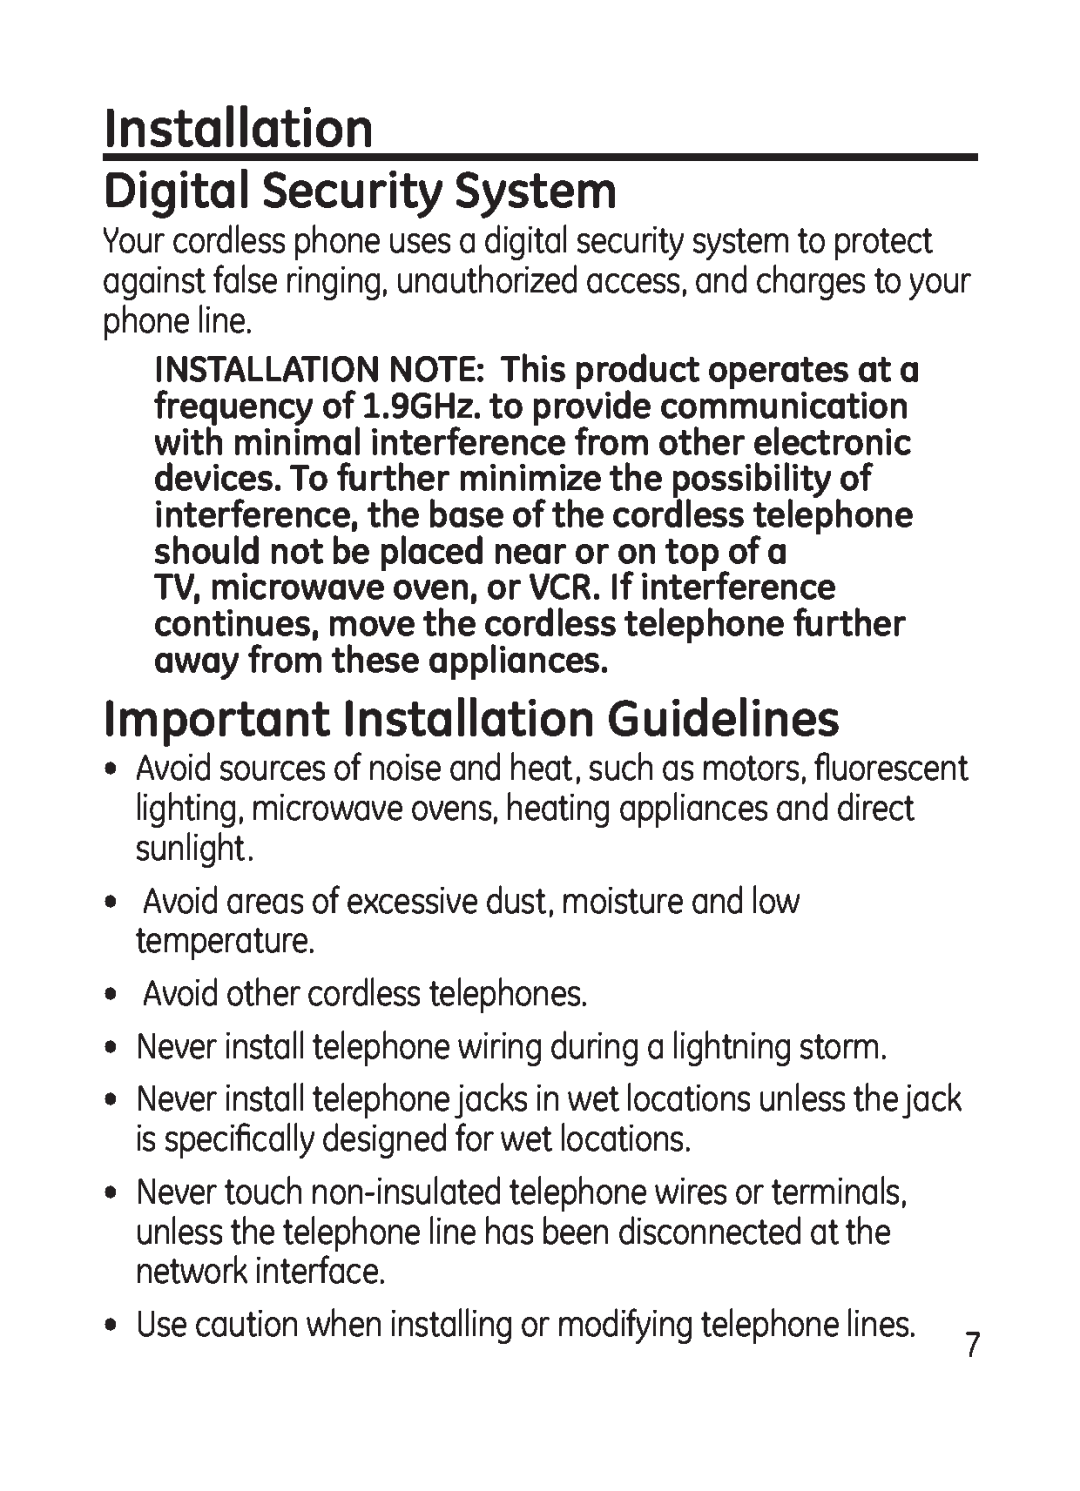 GE 28301 manual Digital Security System, Important Installation Guidelines 